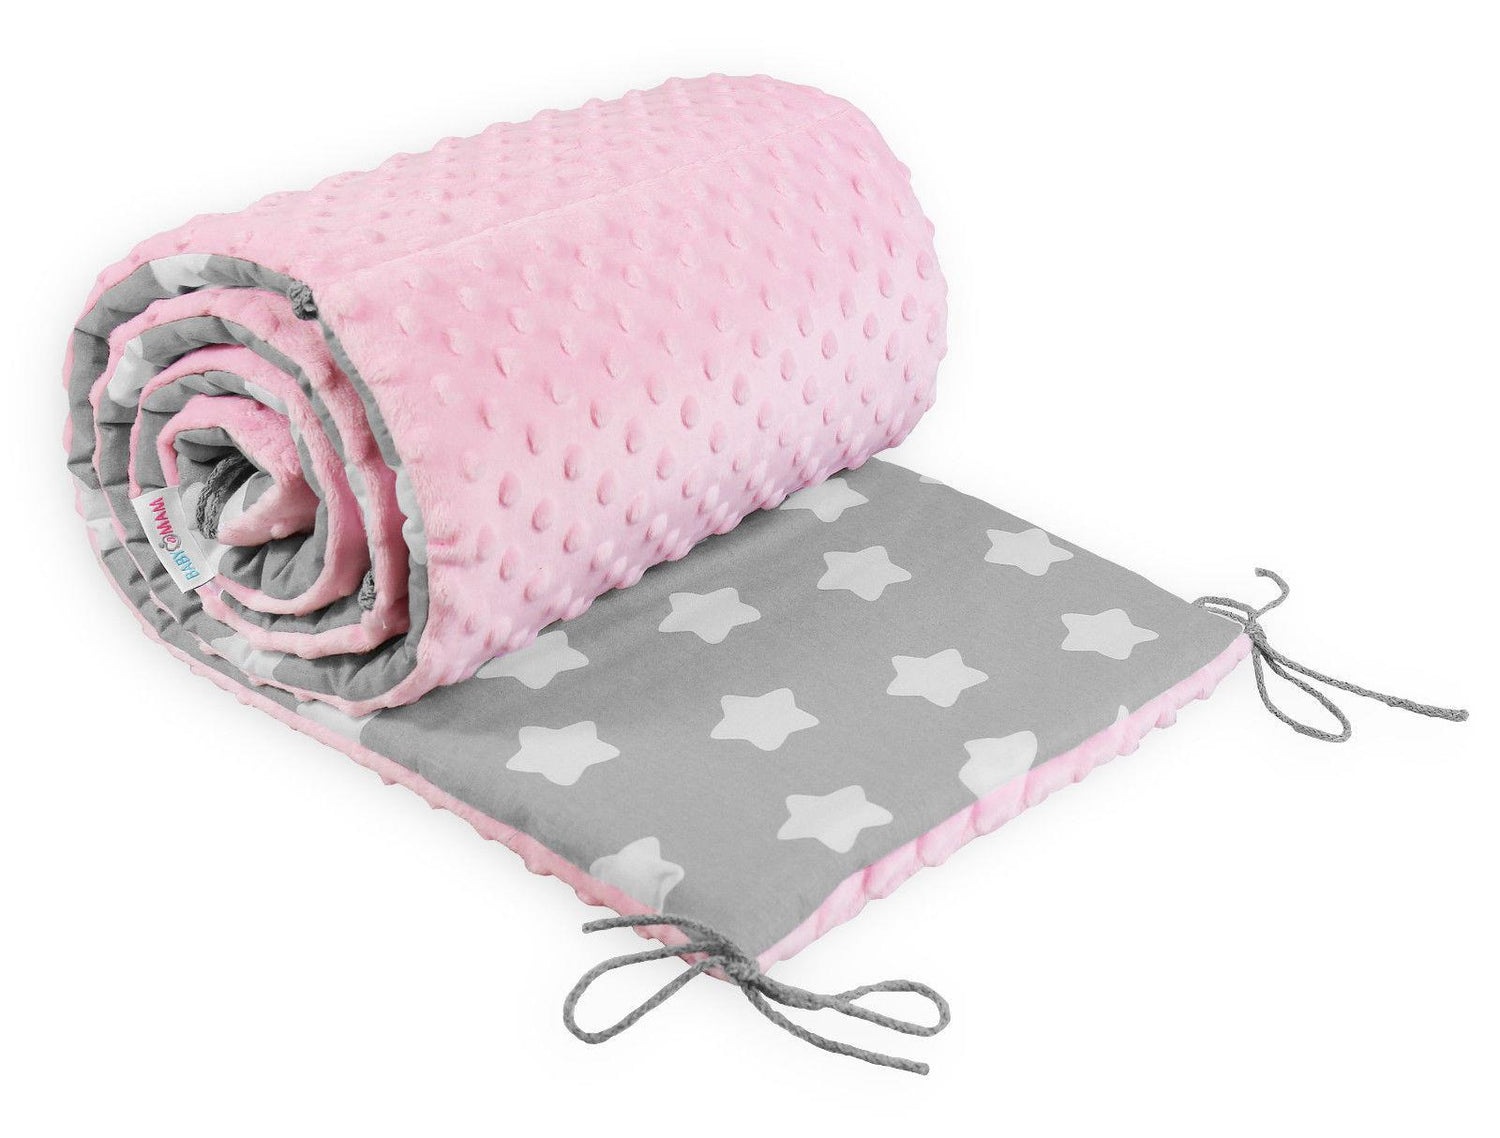 Baby dimple padded bumper nursery protection fit cot bed 140x70 190cm Pink / Big white stars on grey